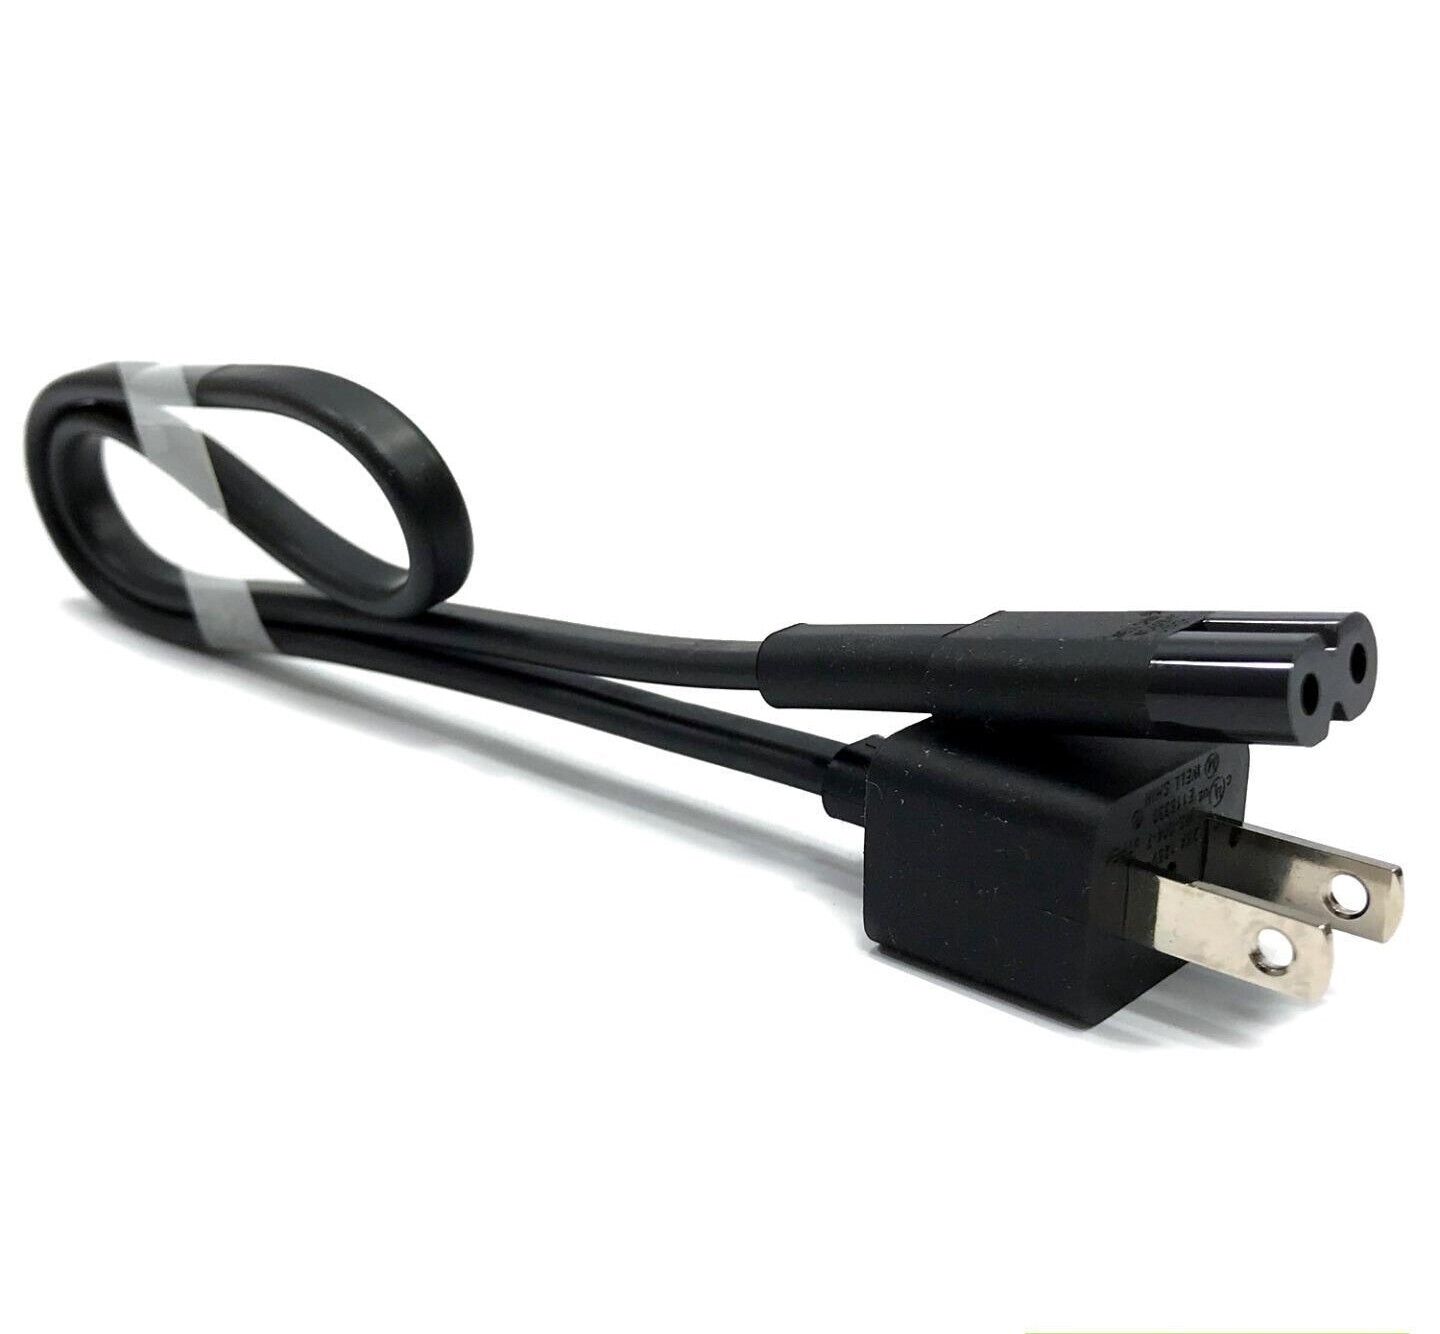 Microsoft 1 1/4ft AC Power adapter Cable Cord, 2.5A 125V Power Supply